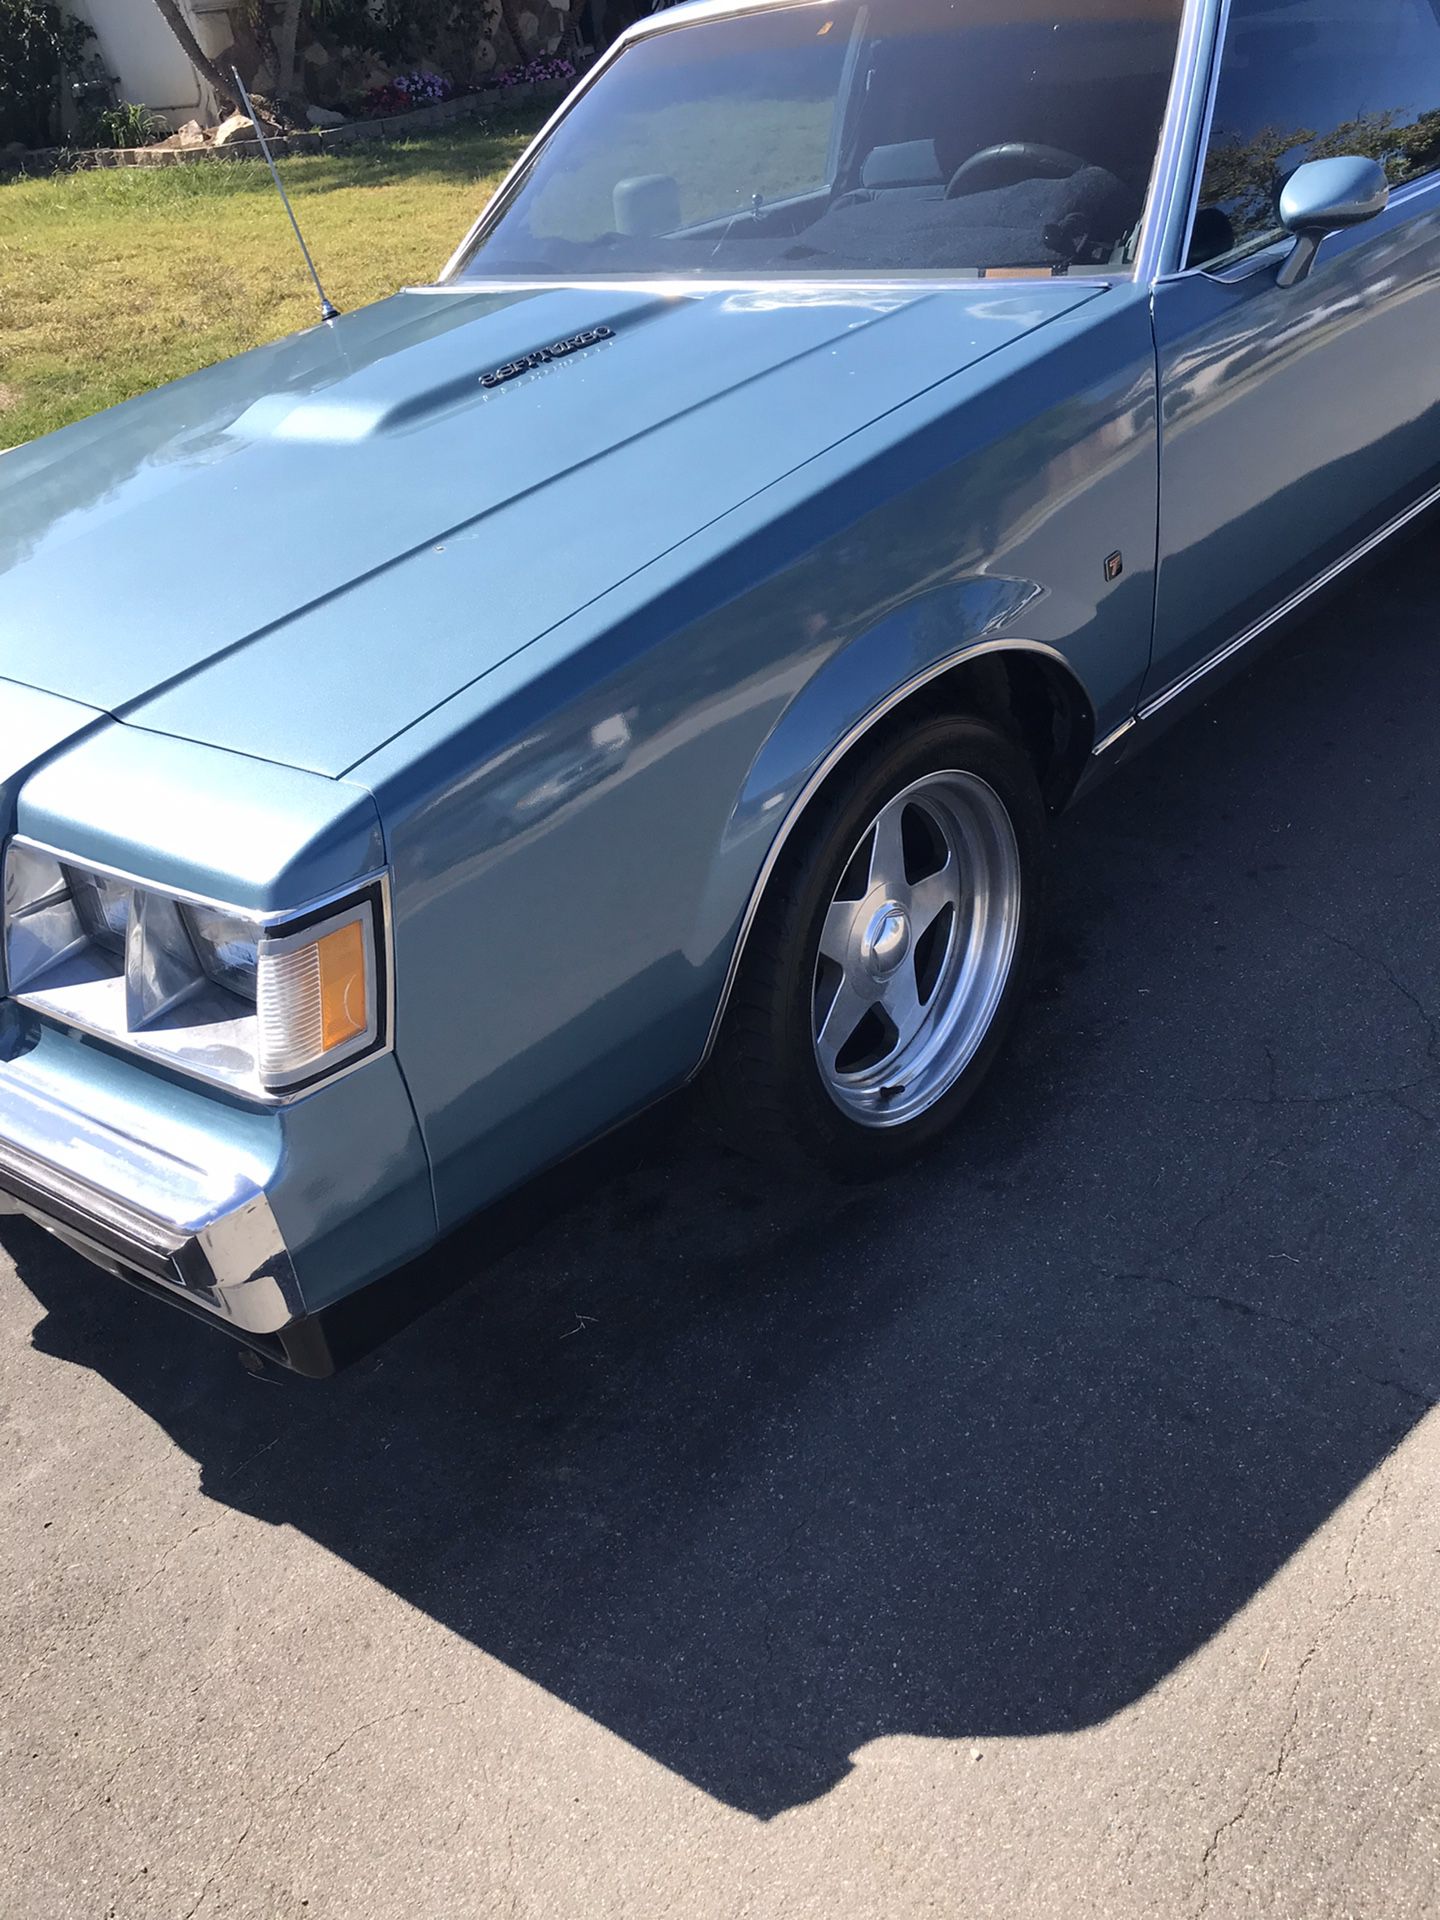 Buick Regal 80-87. Rims for sale tires 80% life